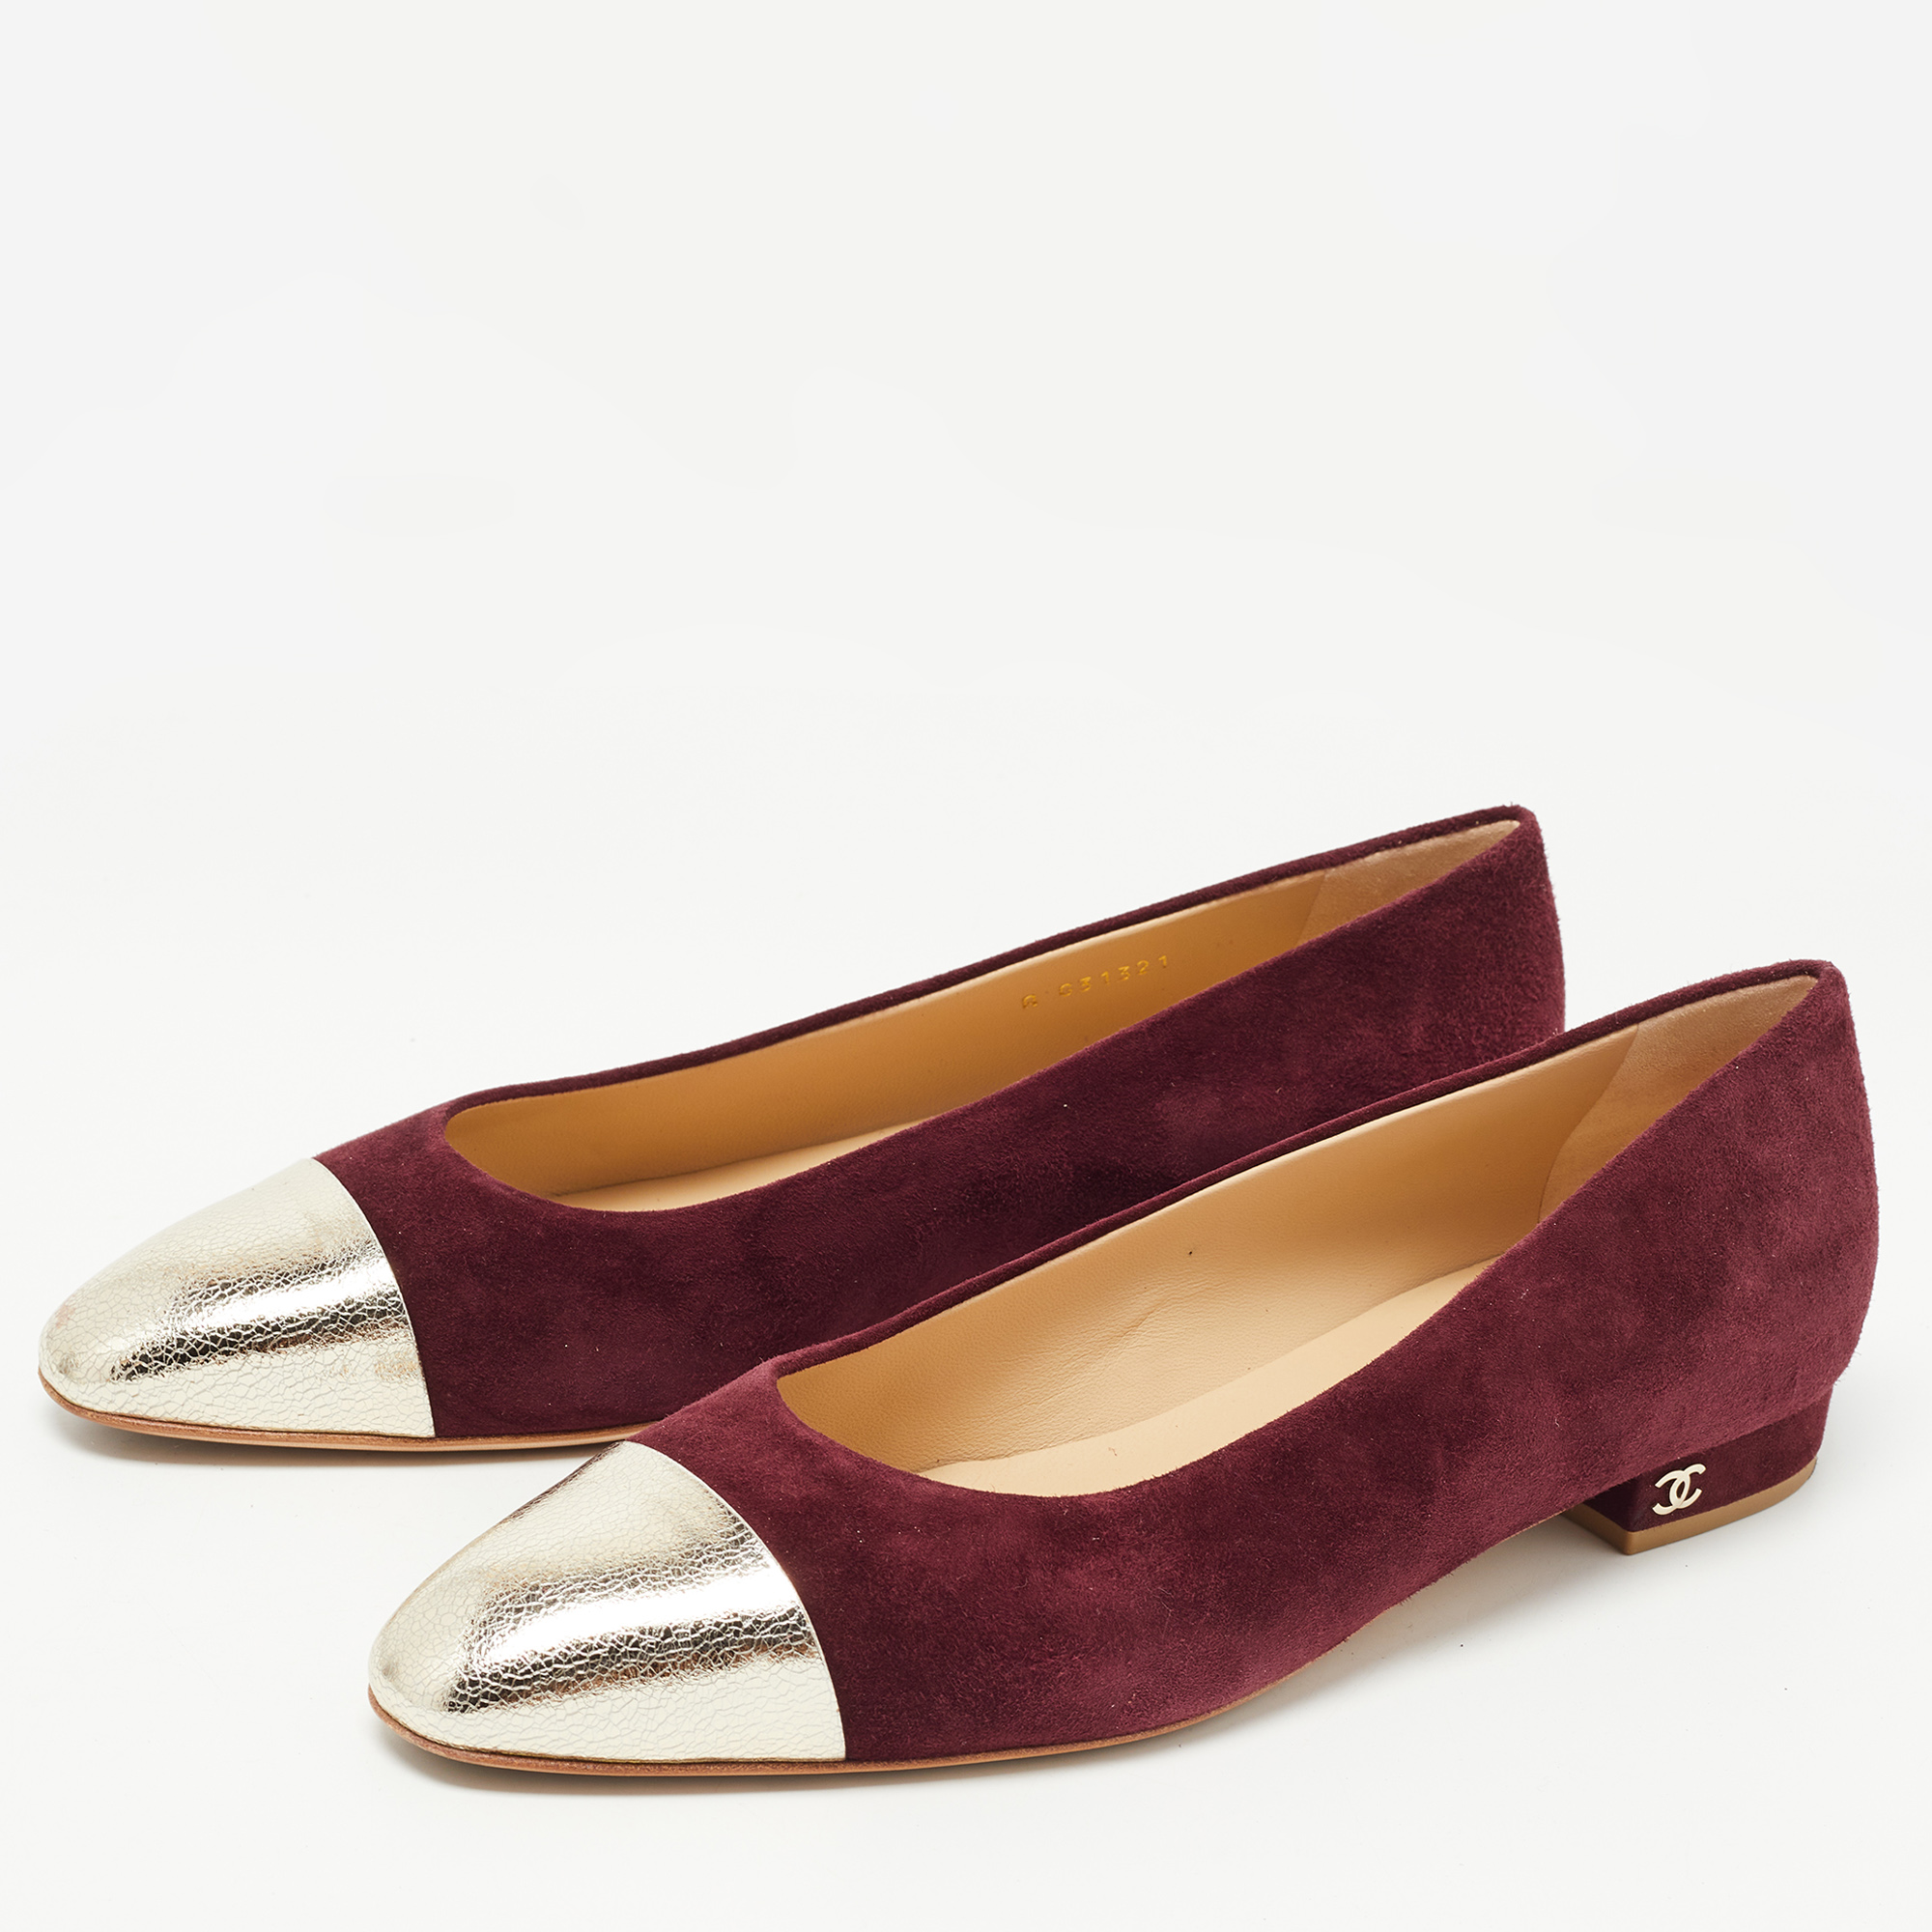 

Chanel Burgundy/Gold Suede and Leather Cap Toe CC Bow Ballet Flats Size